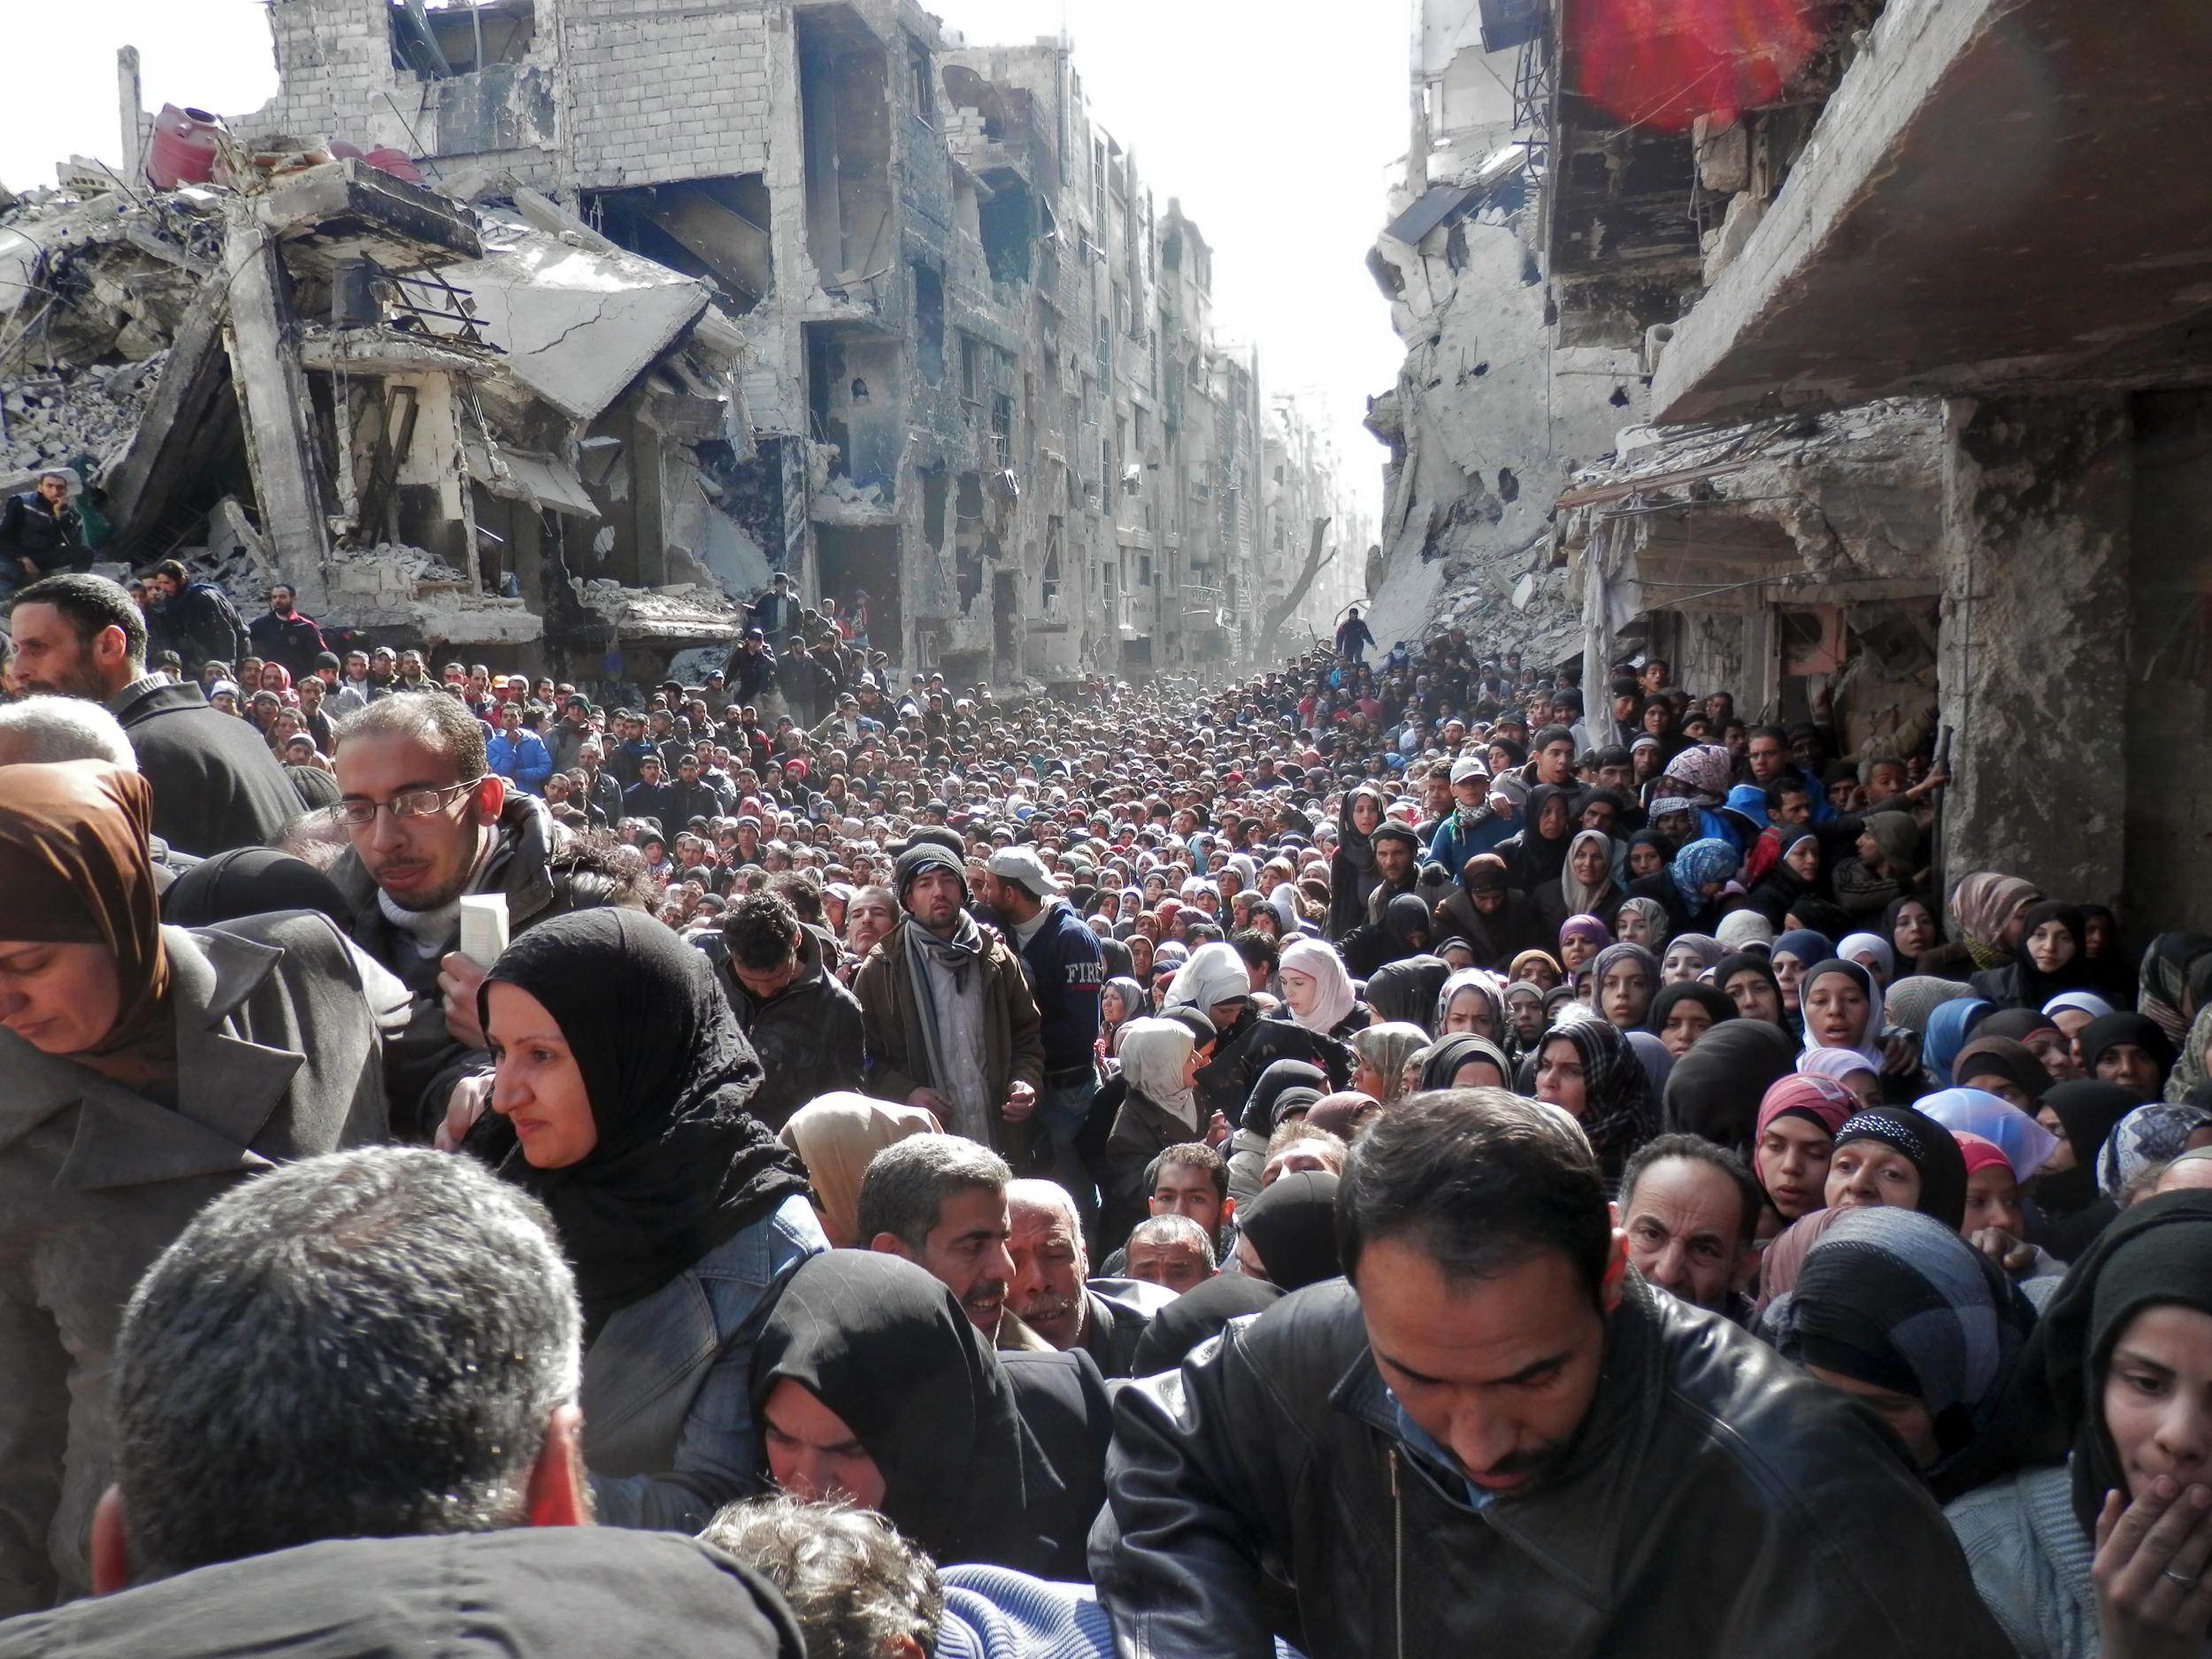 This 2014 image of a Damascus refugee camp shows the kind of poverty and overcrowding that some blame on the drought